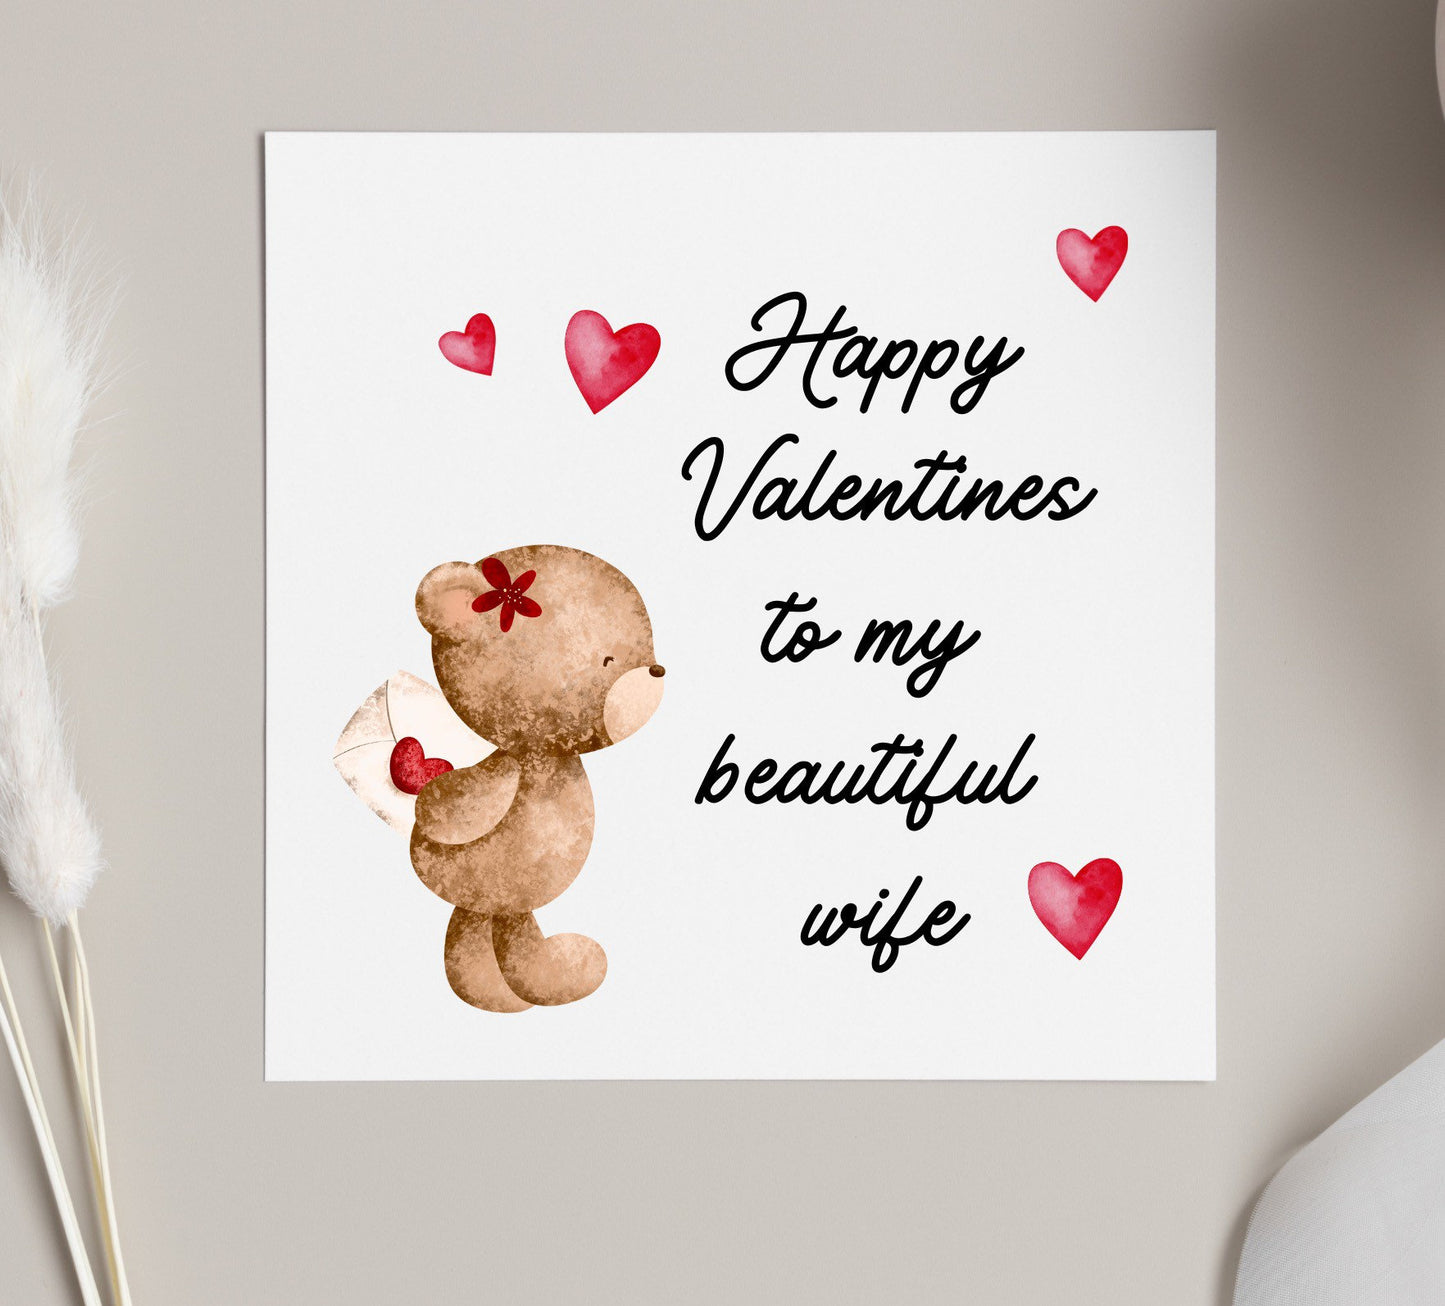 Happy Valentines Day to my beautiful wife Card, teddy bear and hearts design card for wife on valentines